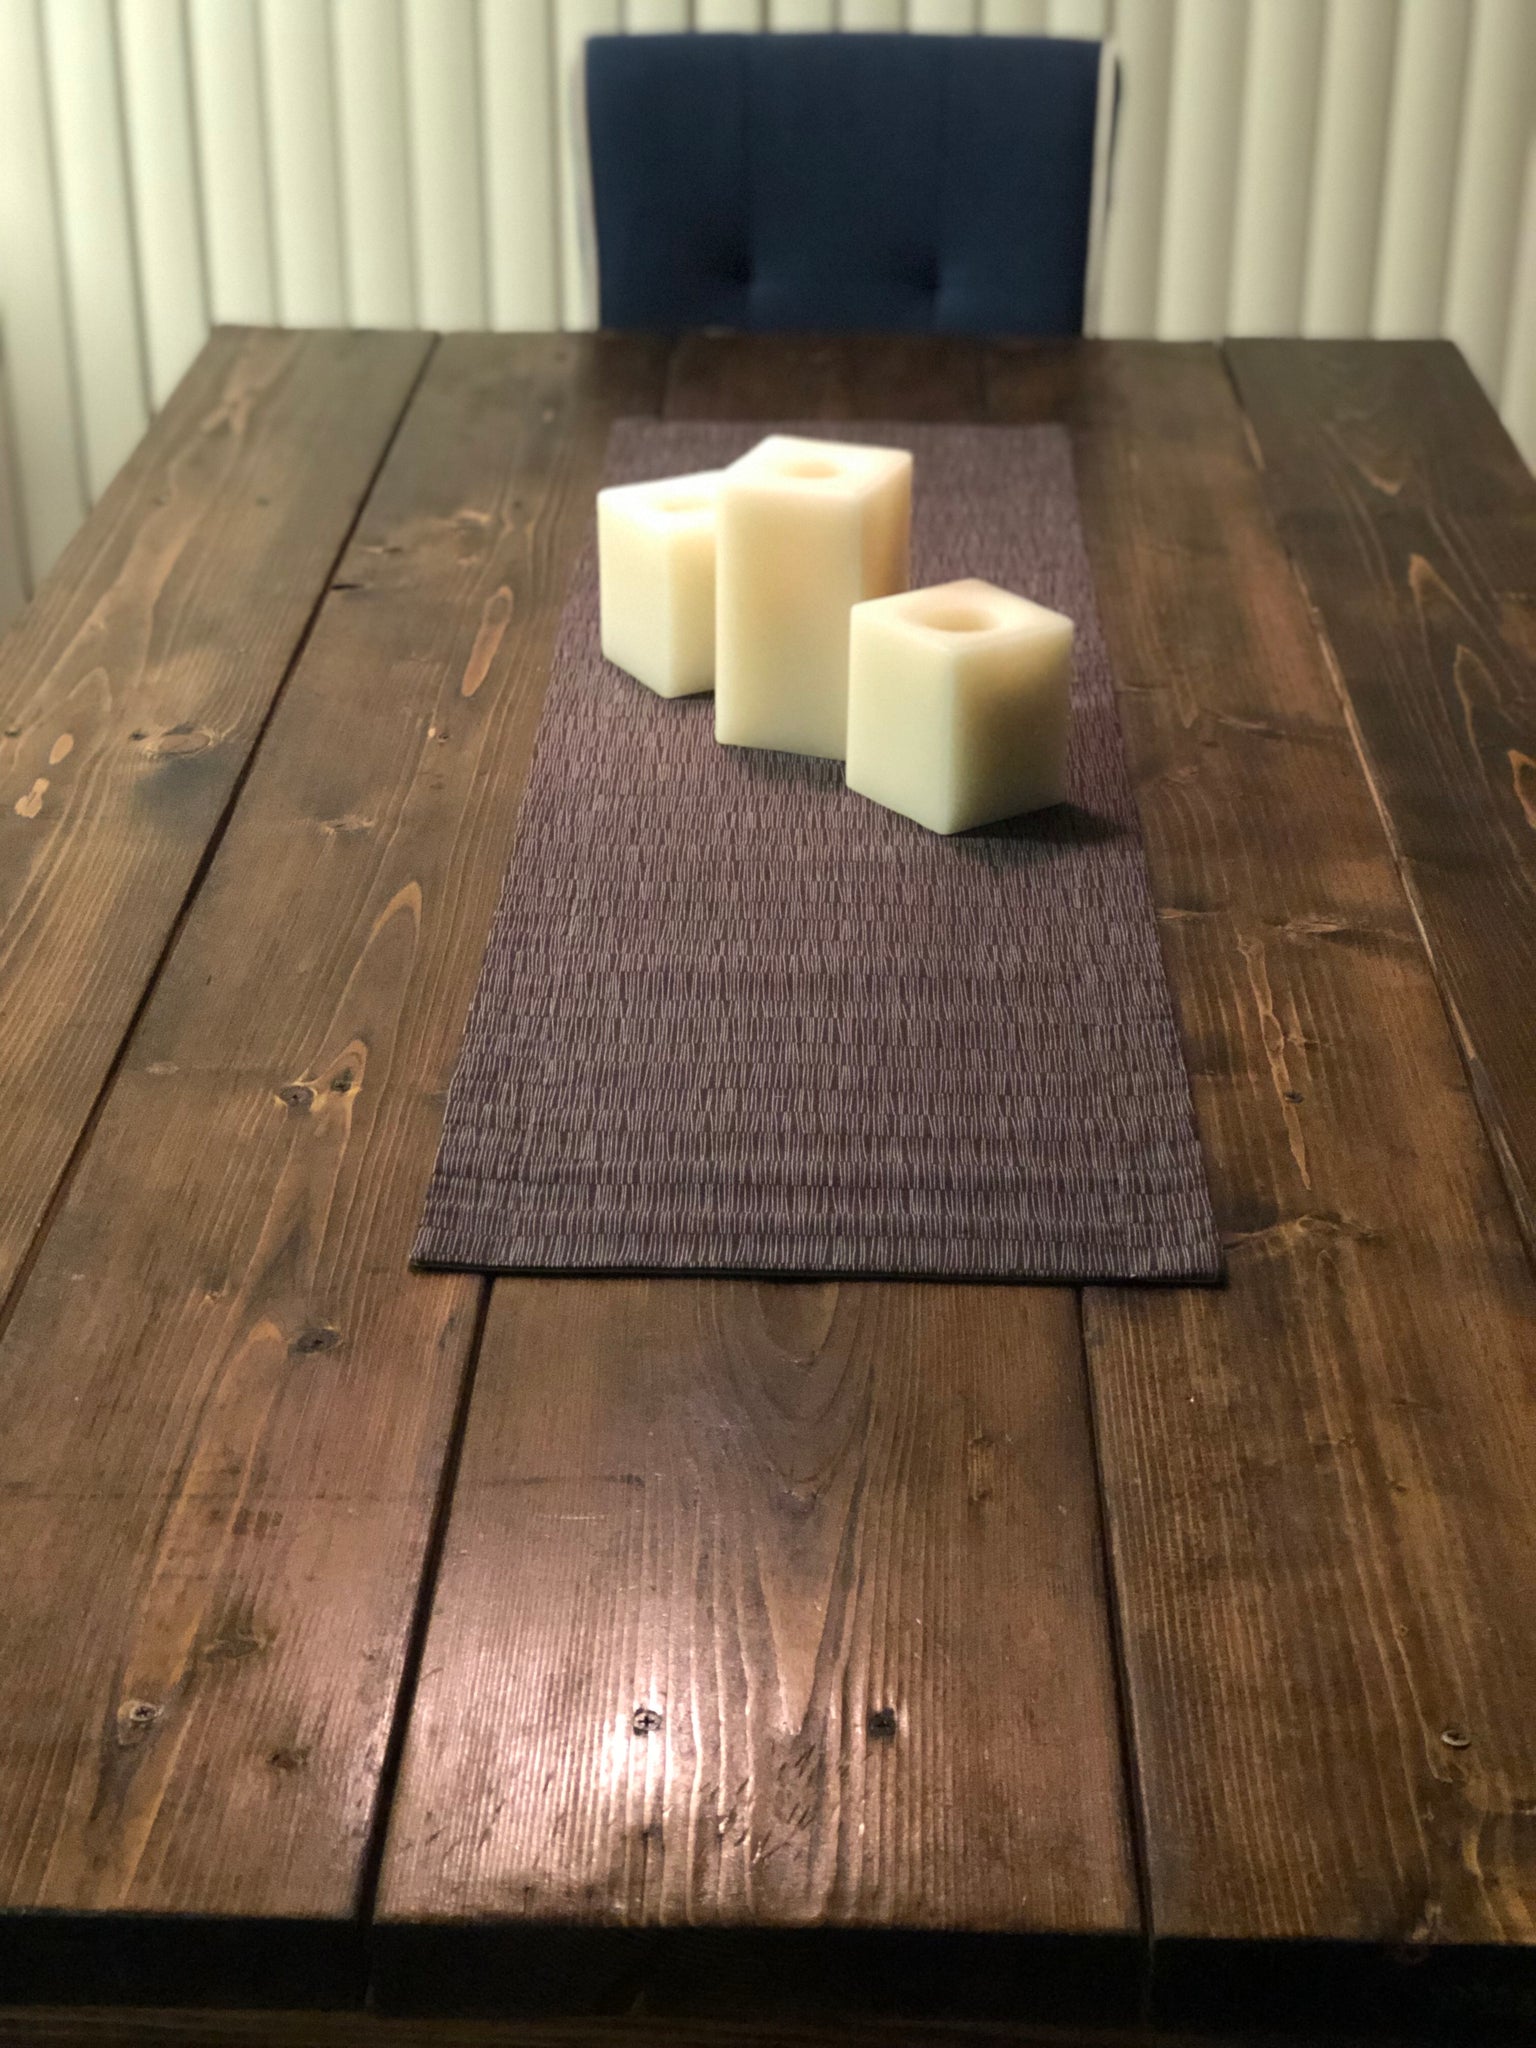 Accent Table Runner - Chocolate Brown/Cream Lines